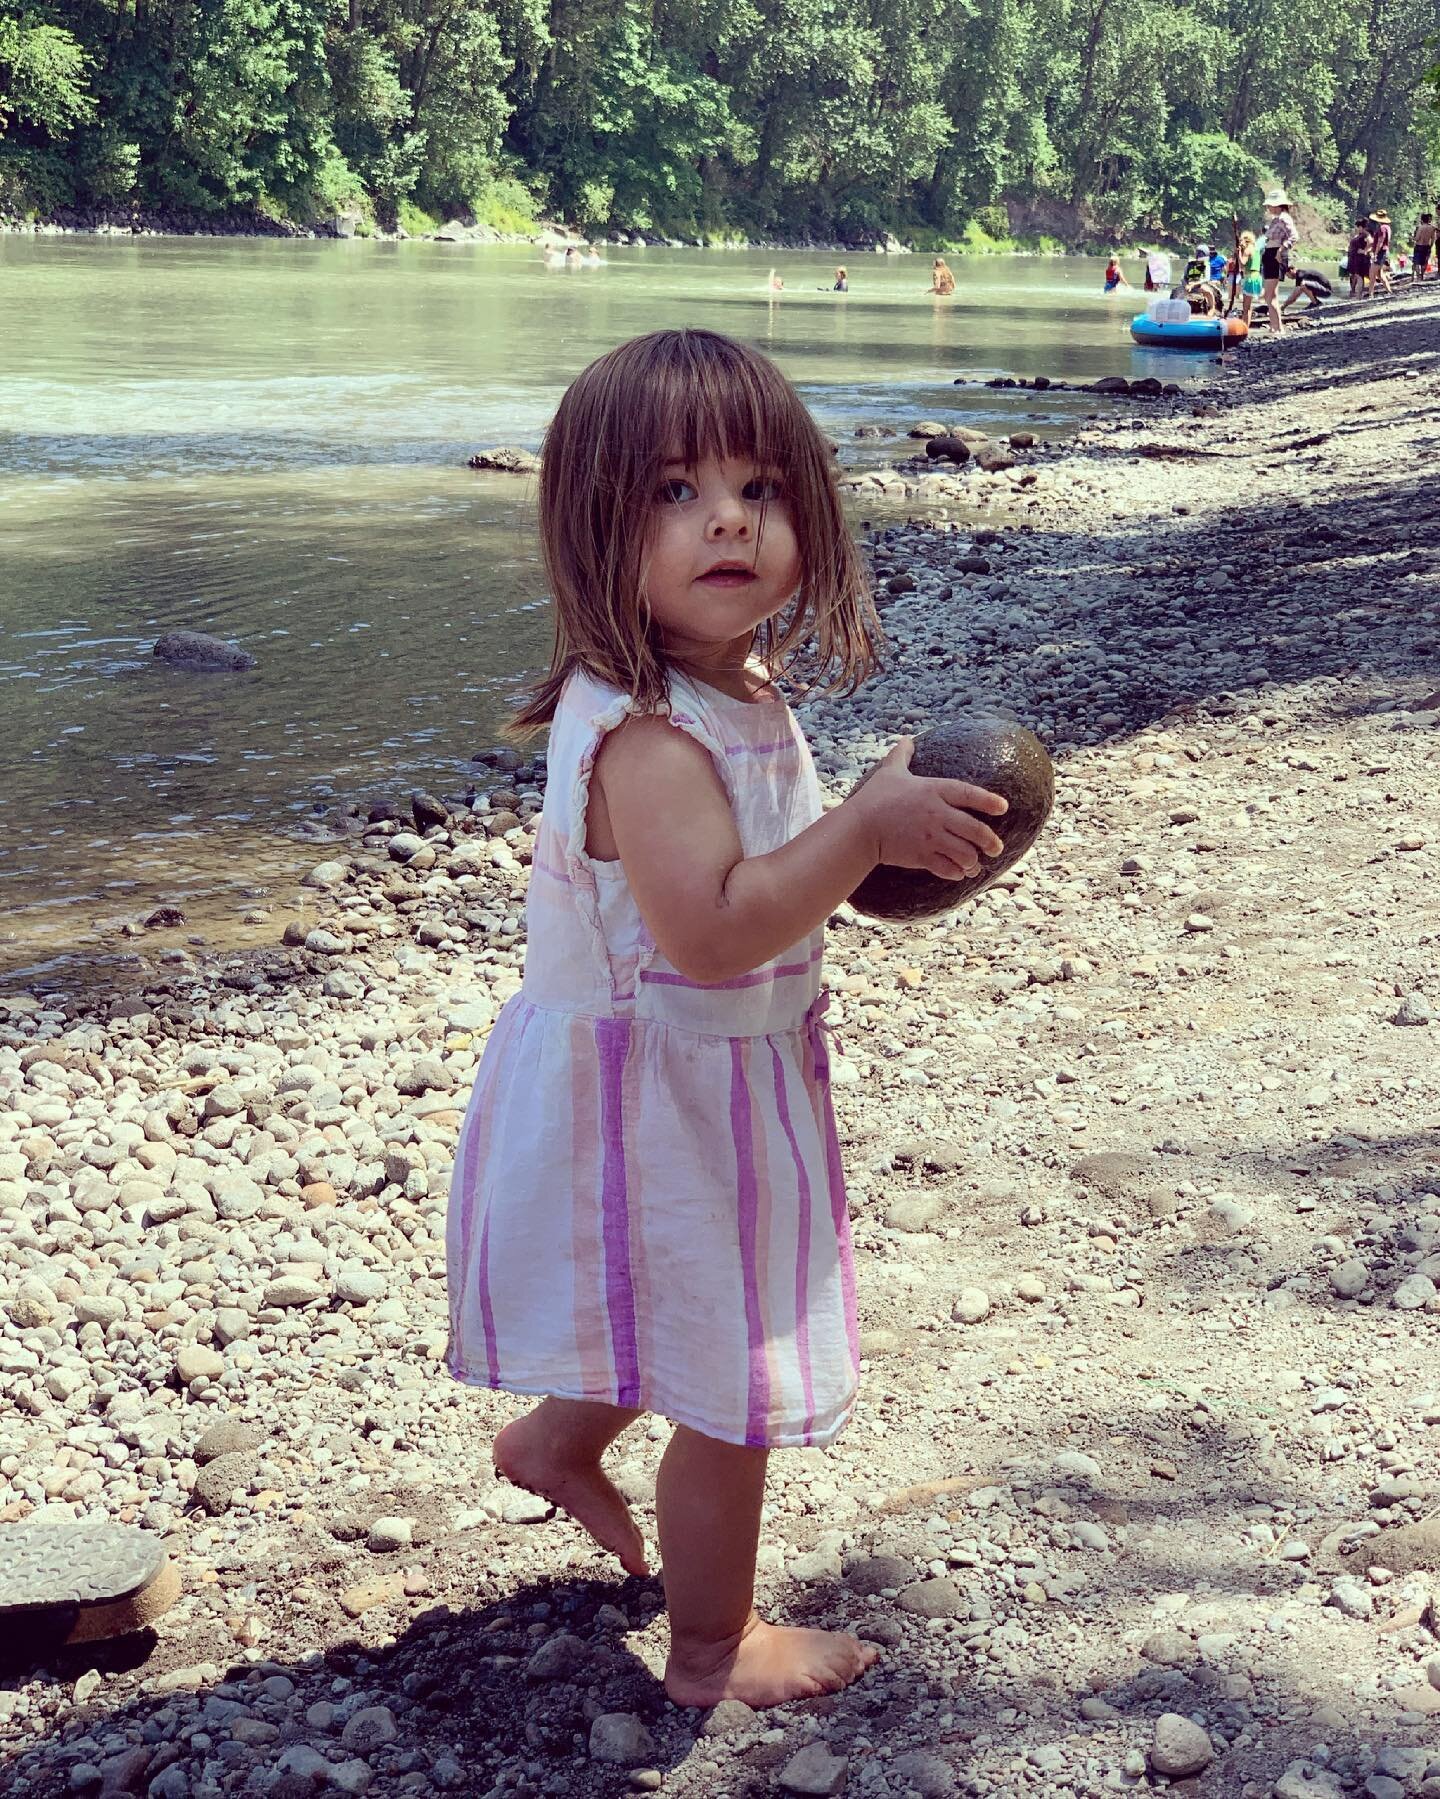 One of my favorite things about being a parent is watching your child&rsquo;s personality quirks emerge from a very young age. Like how my youngest always looks for the absolute biggest rock she can find to hurl into the river. Never satisfied with s